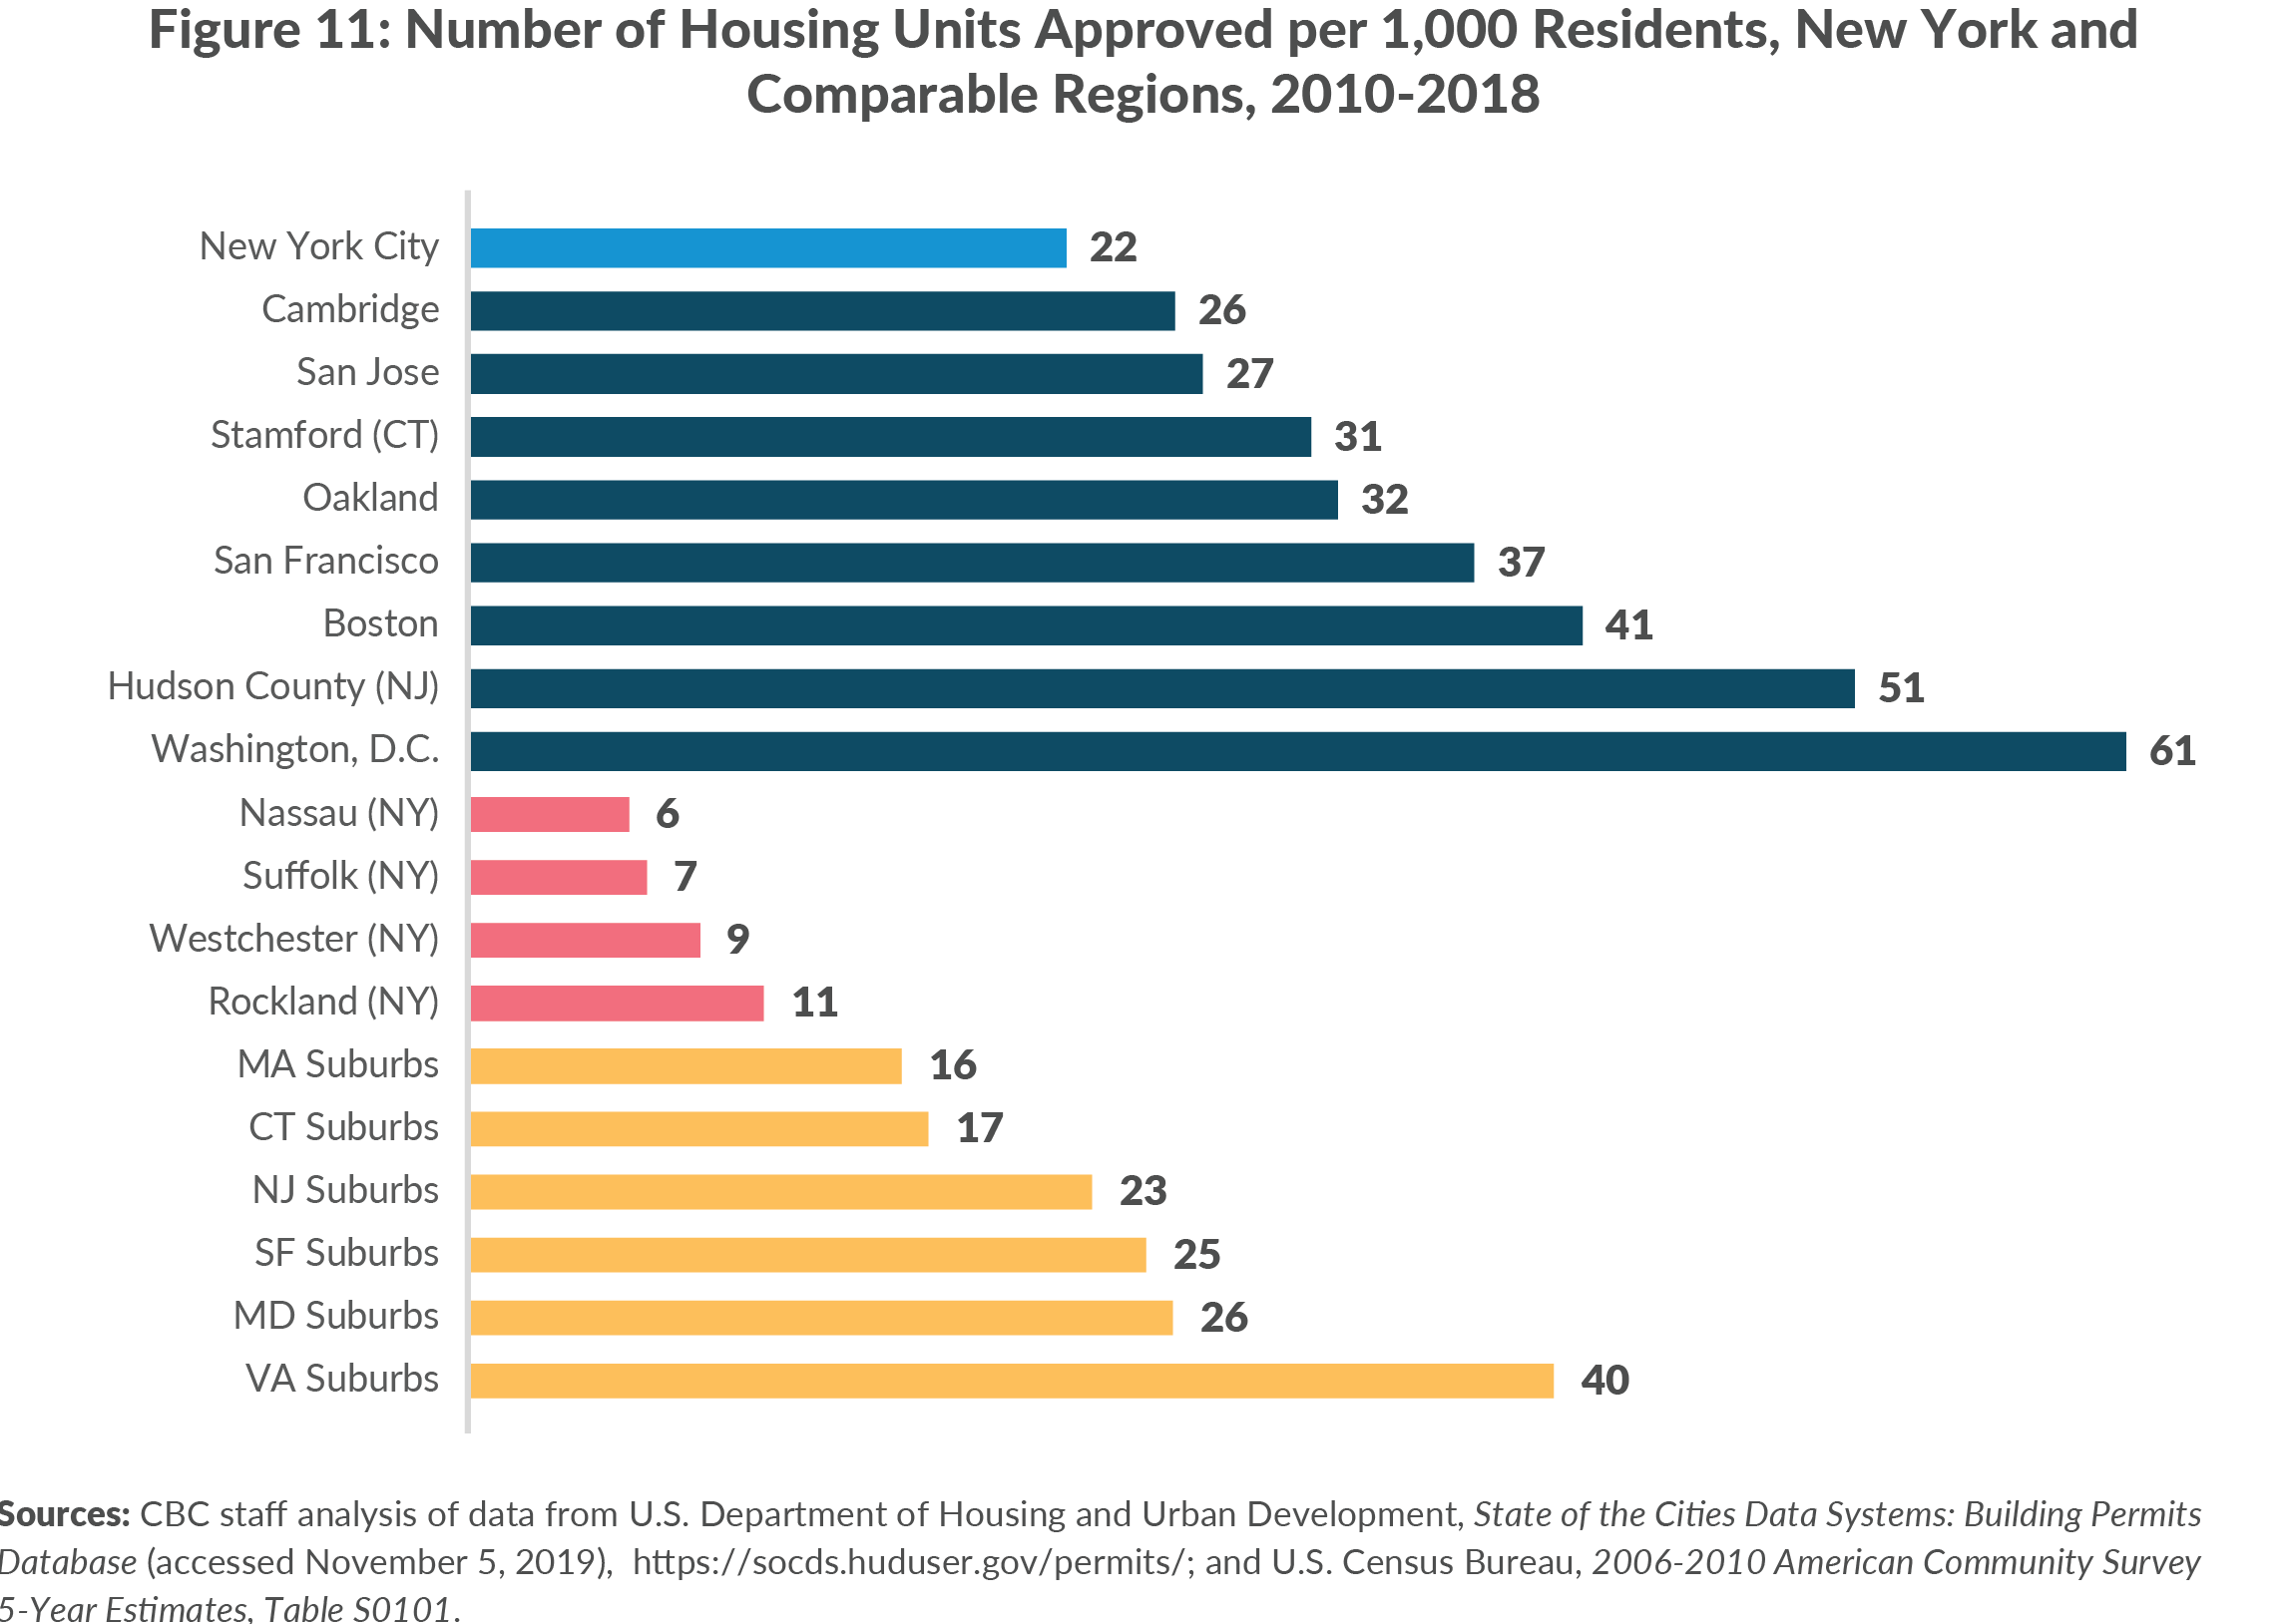 Figure 11. Number of Approved Residential Units per 1,000 Residents, New York and Comparable Regions, 2010-2018